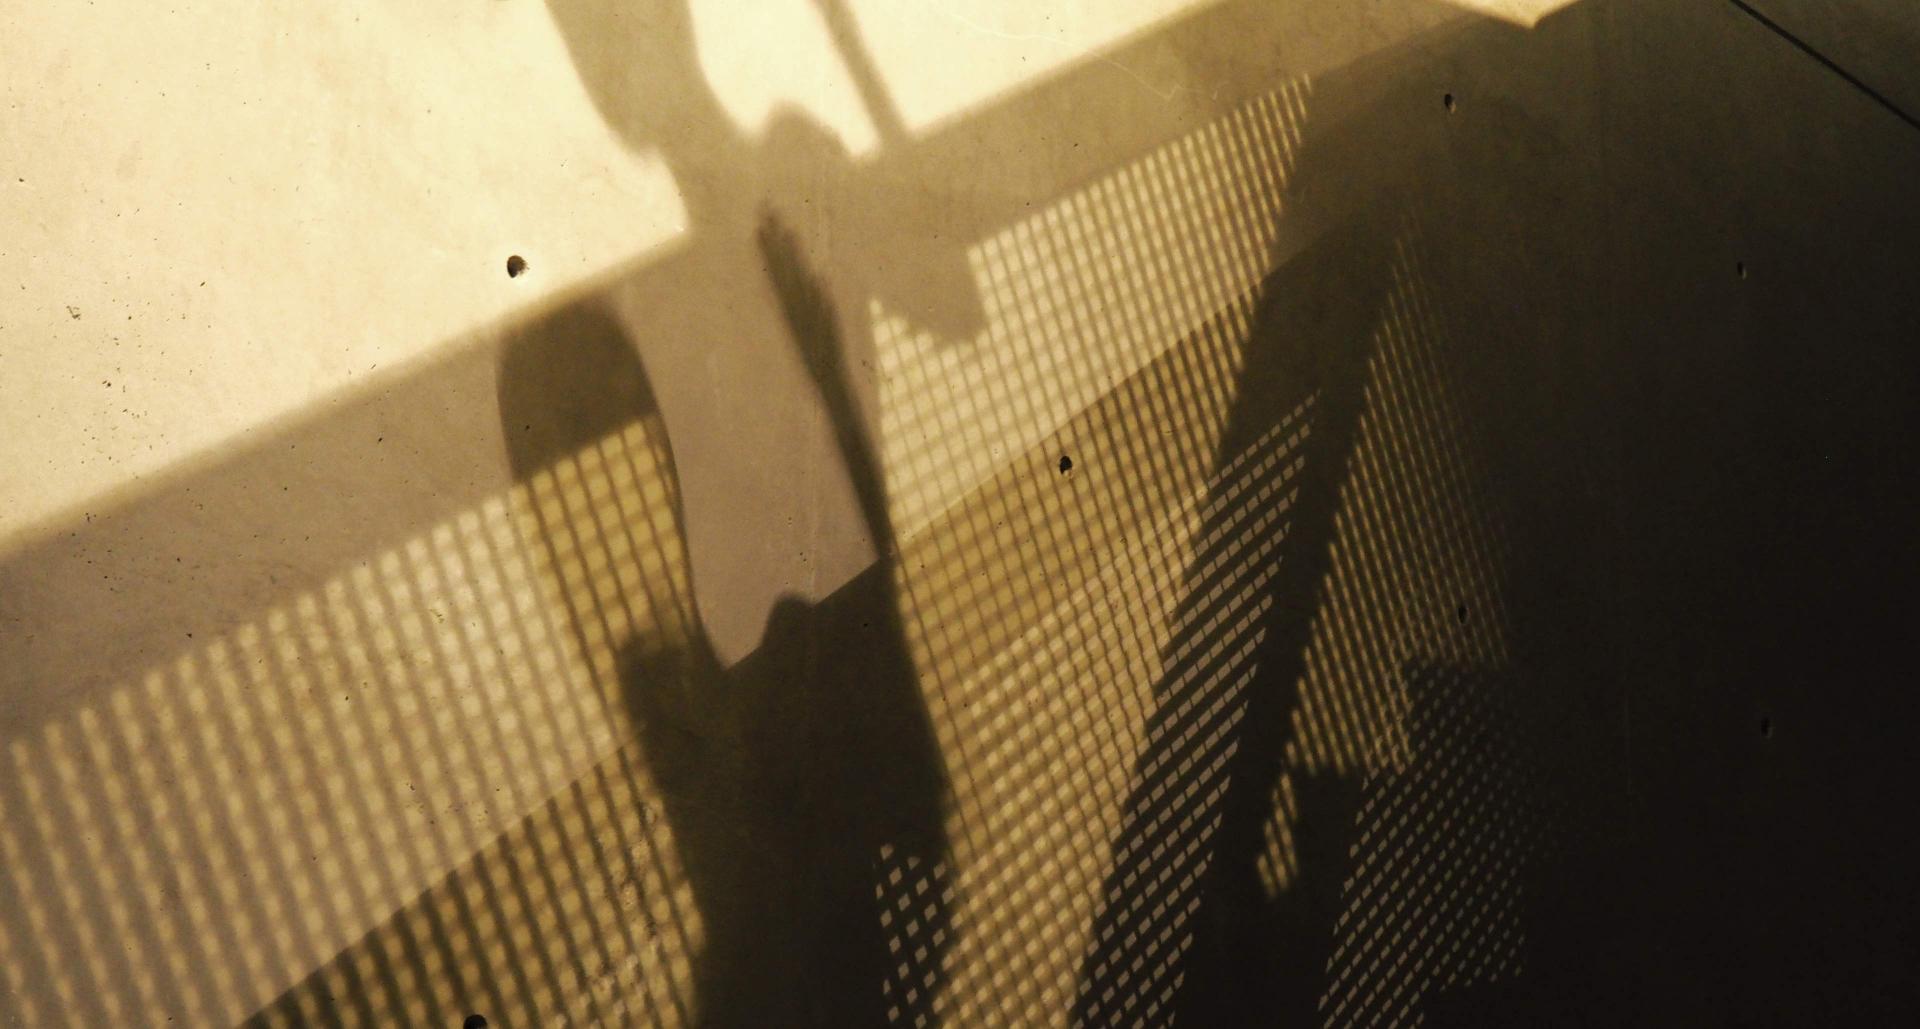 The shadow of a person on a wall.